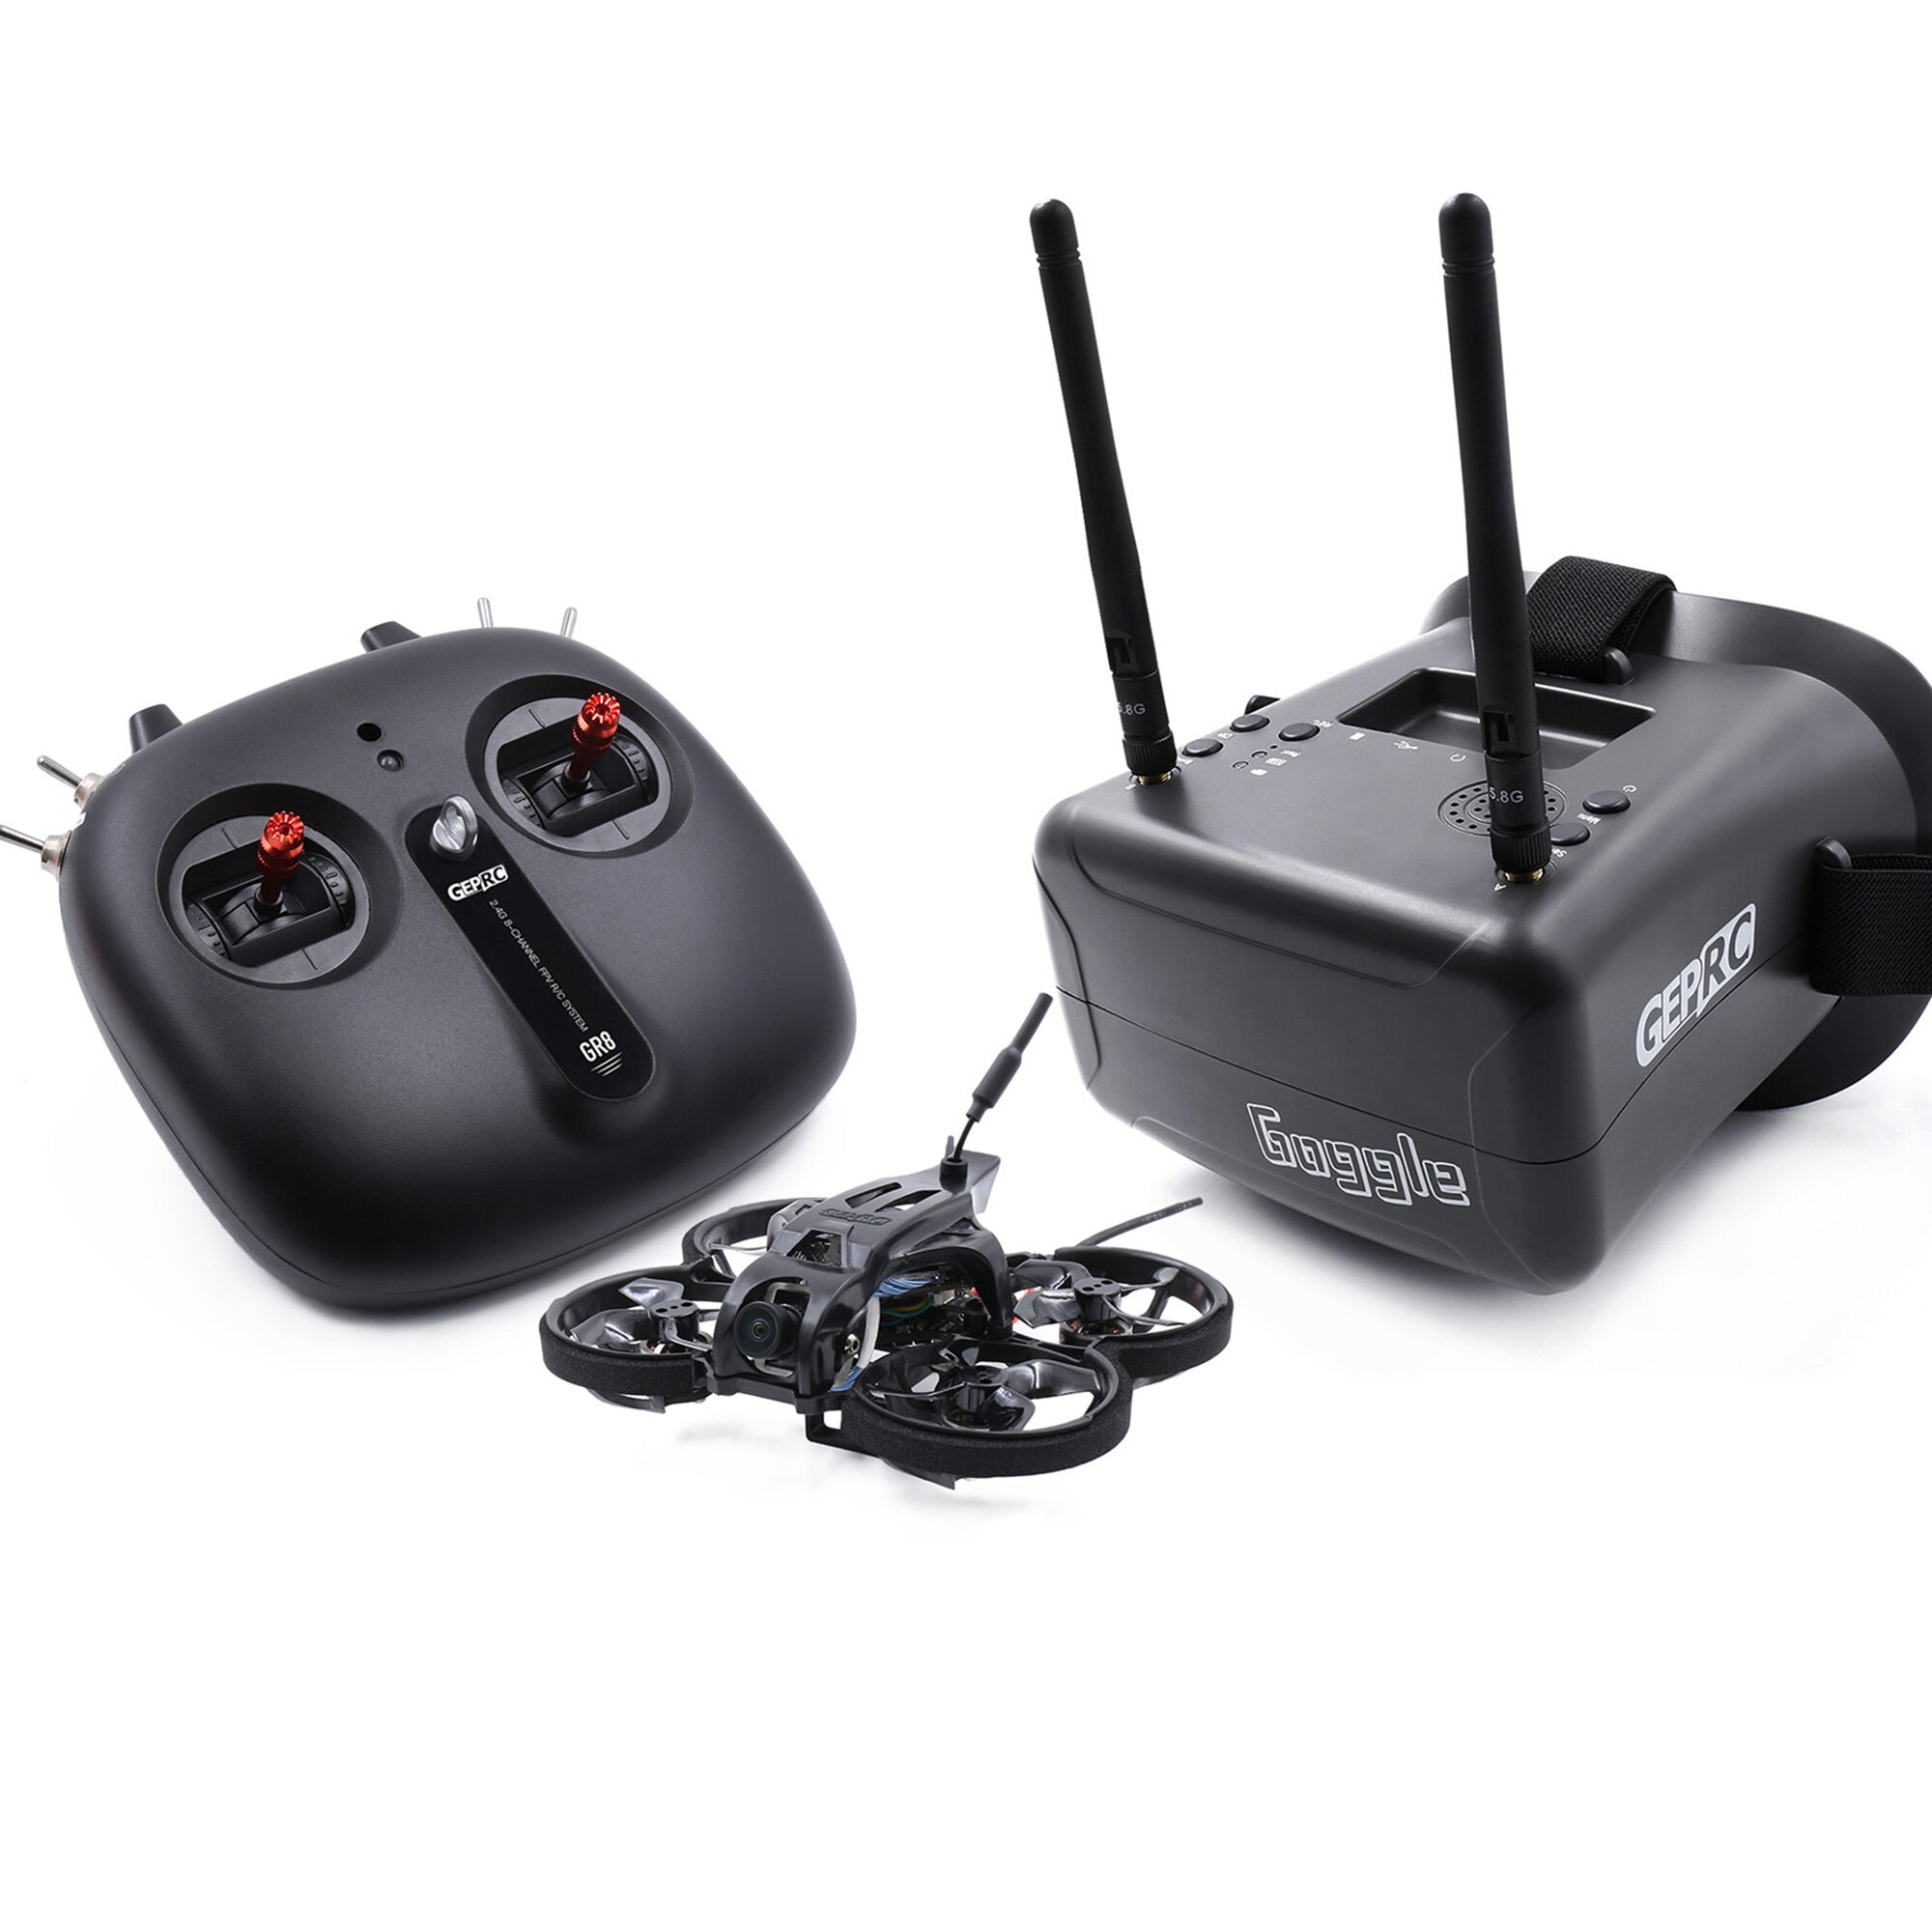 GEPRC TinyGO 1.6inch 2S 4K Caddx Loris FPV Indoor Whoop+GR8 Remote Controller+RG1 Goggles RTF Ready To Fly FPV Racing RC